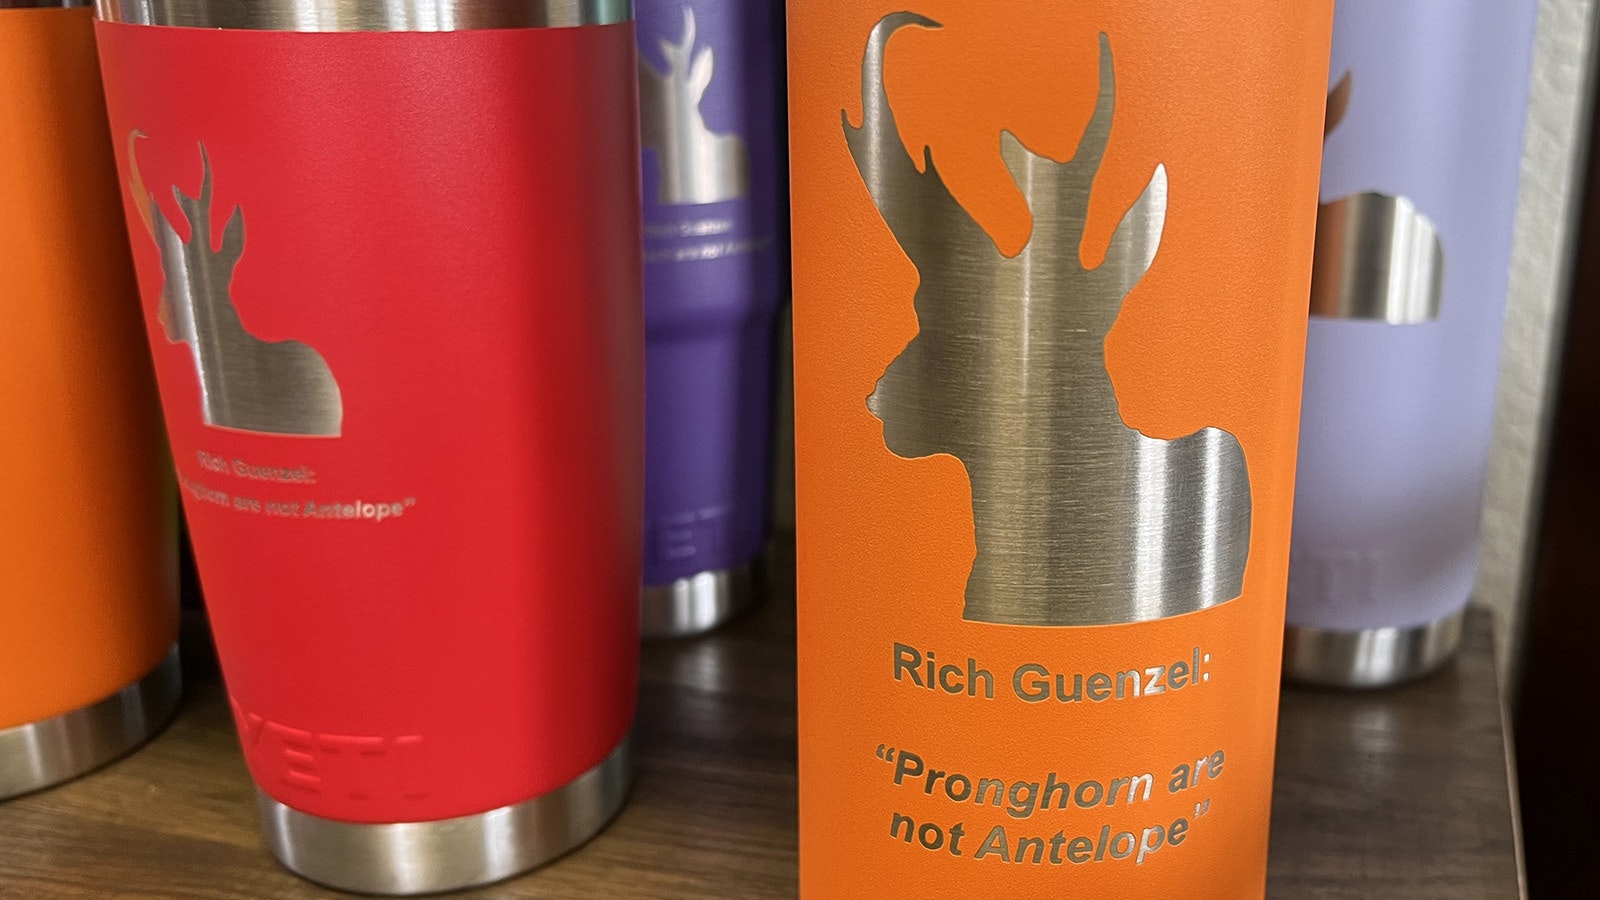 Rich Guenzel, a Laramie wildlife biologist, insisted that pronghorns deserve their proper name and created these cups to help illustrate that point.